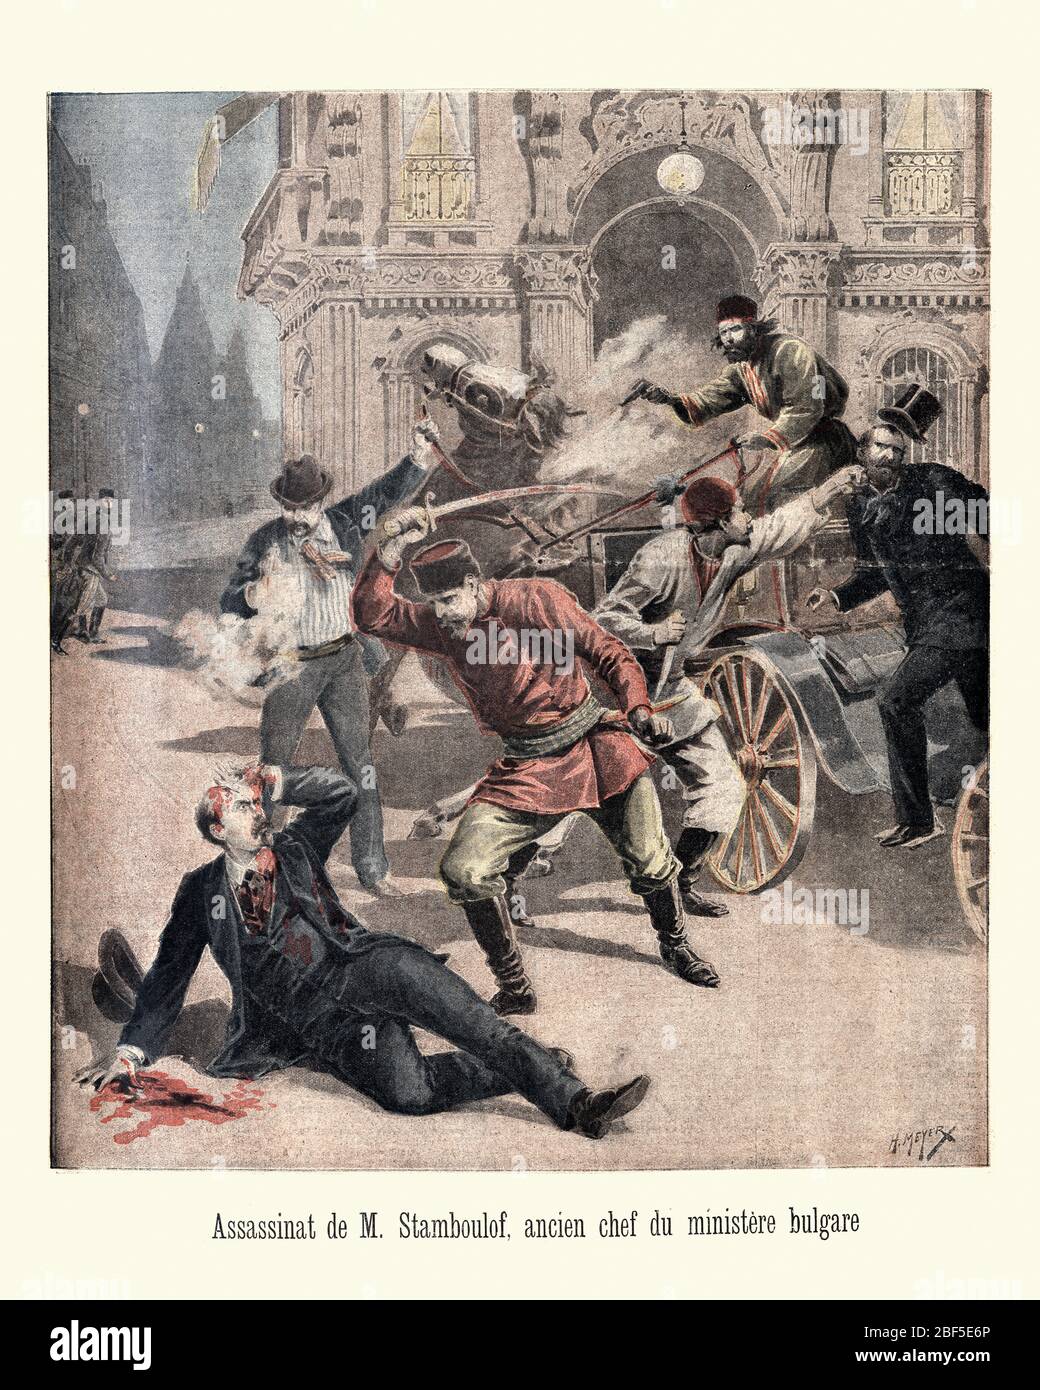 Vintage engraving of  Assassinat de M. Stamboulof, ancien chef du ministere bulgare. Assassination of Stefan Stambolov, former Prime Minister of Bulgaria. On 15 July 1895, Stambolov took a carriage to his home, along with his bodyguard and a friend. Midway, the carriage was stopped by an assassin who fired his revolver, thus startling the horses. Stambolov quickly exited, but was met by three more assassins, armed with knives. Stock Photo